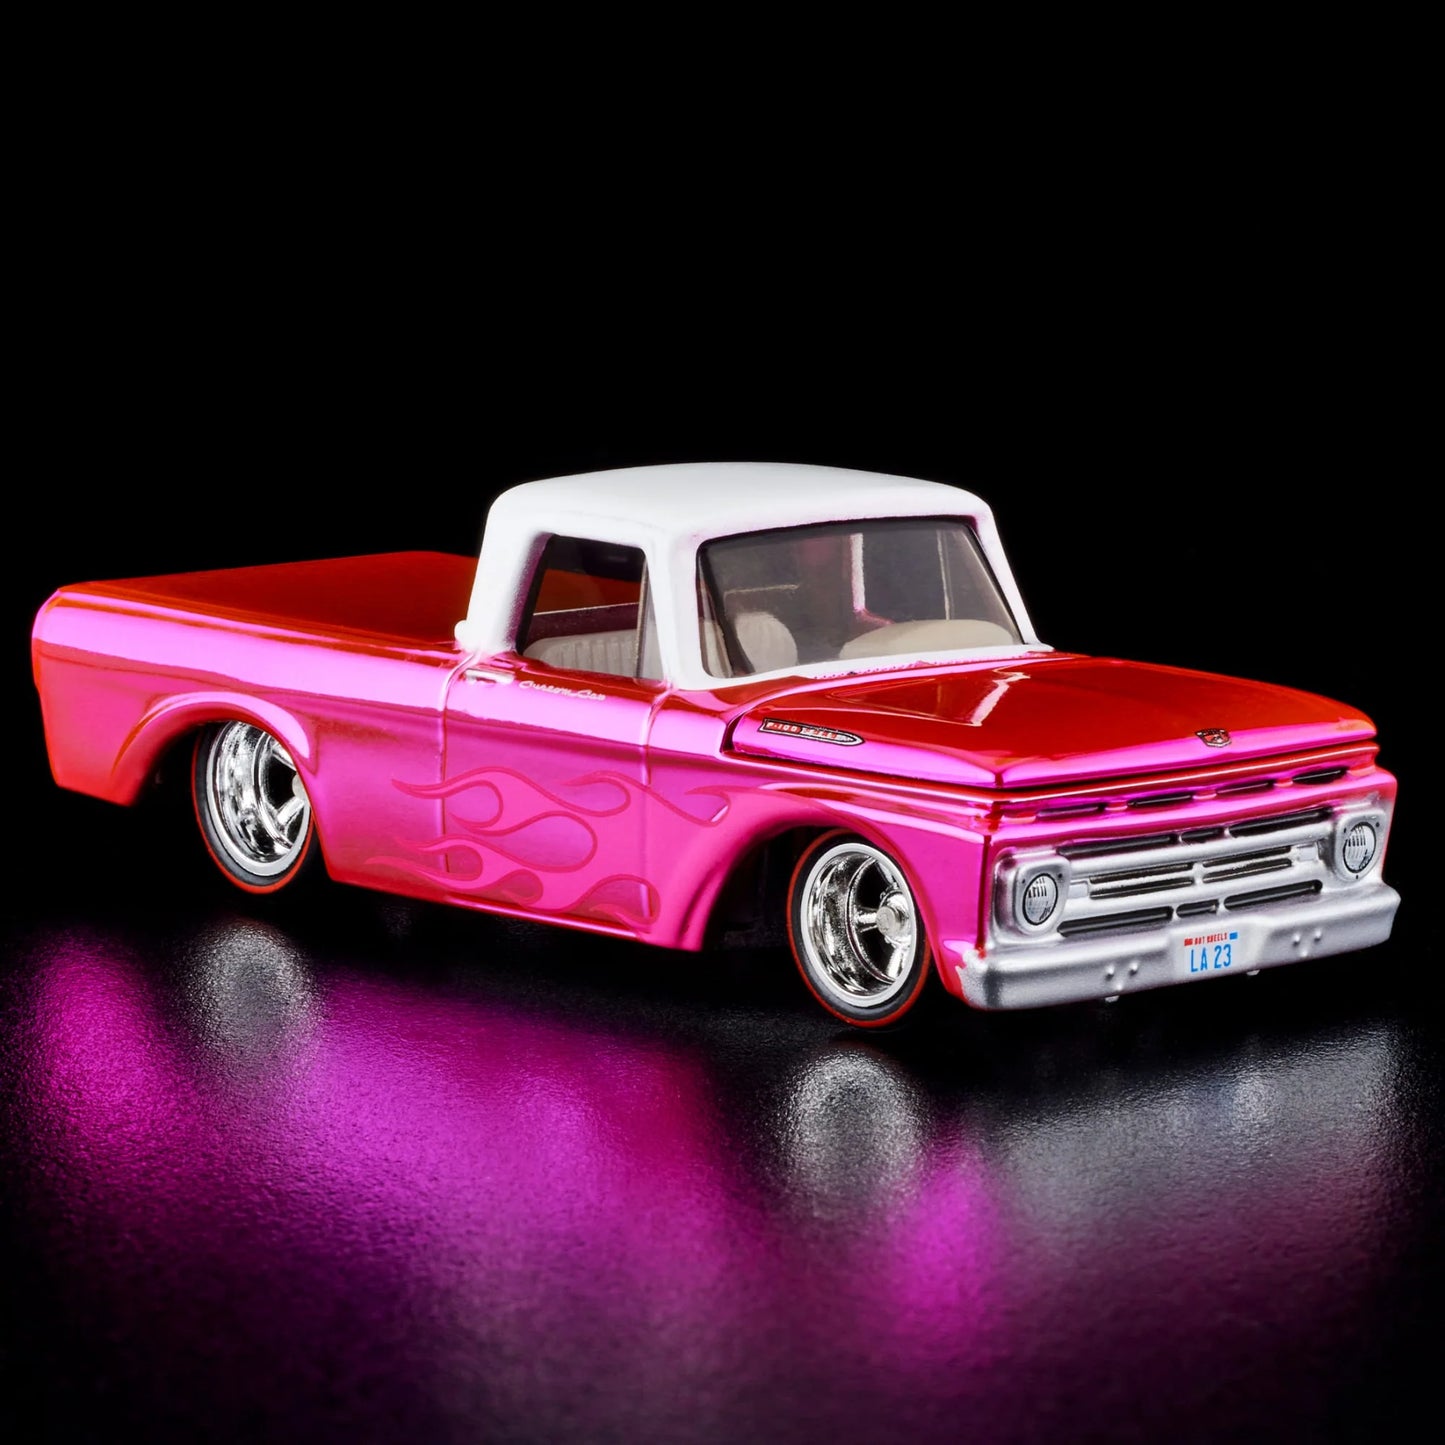 Hot Wheels RLC Exclusive Pink Edition 1962 Ford F100